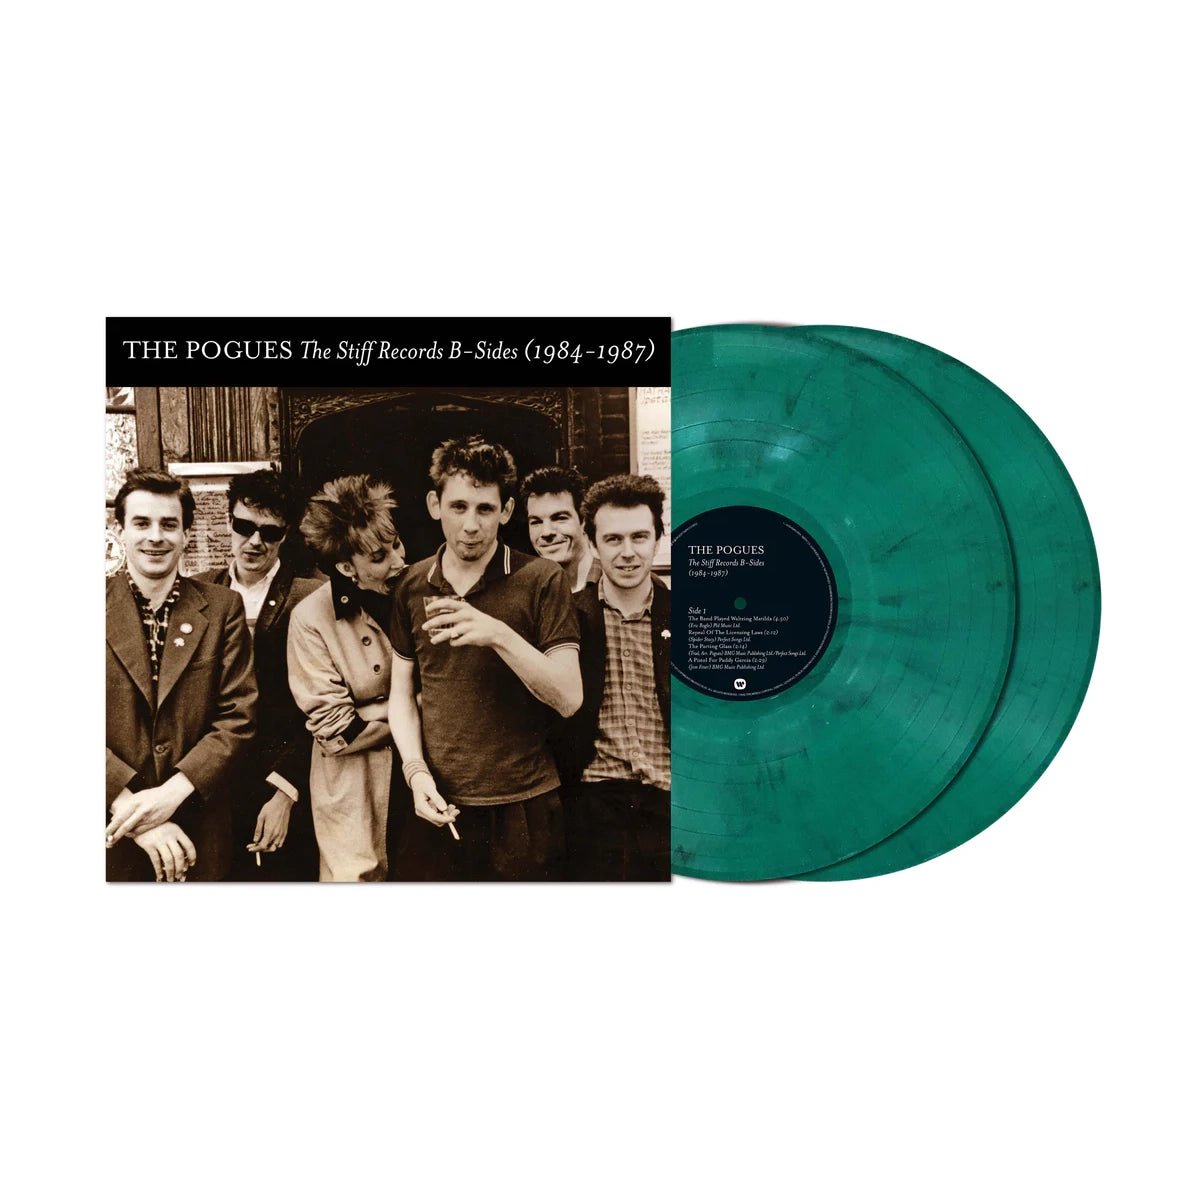 The Pogues - The Stiff Records B-Sides Vinyl